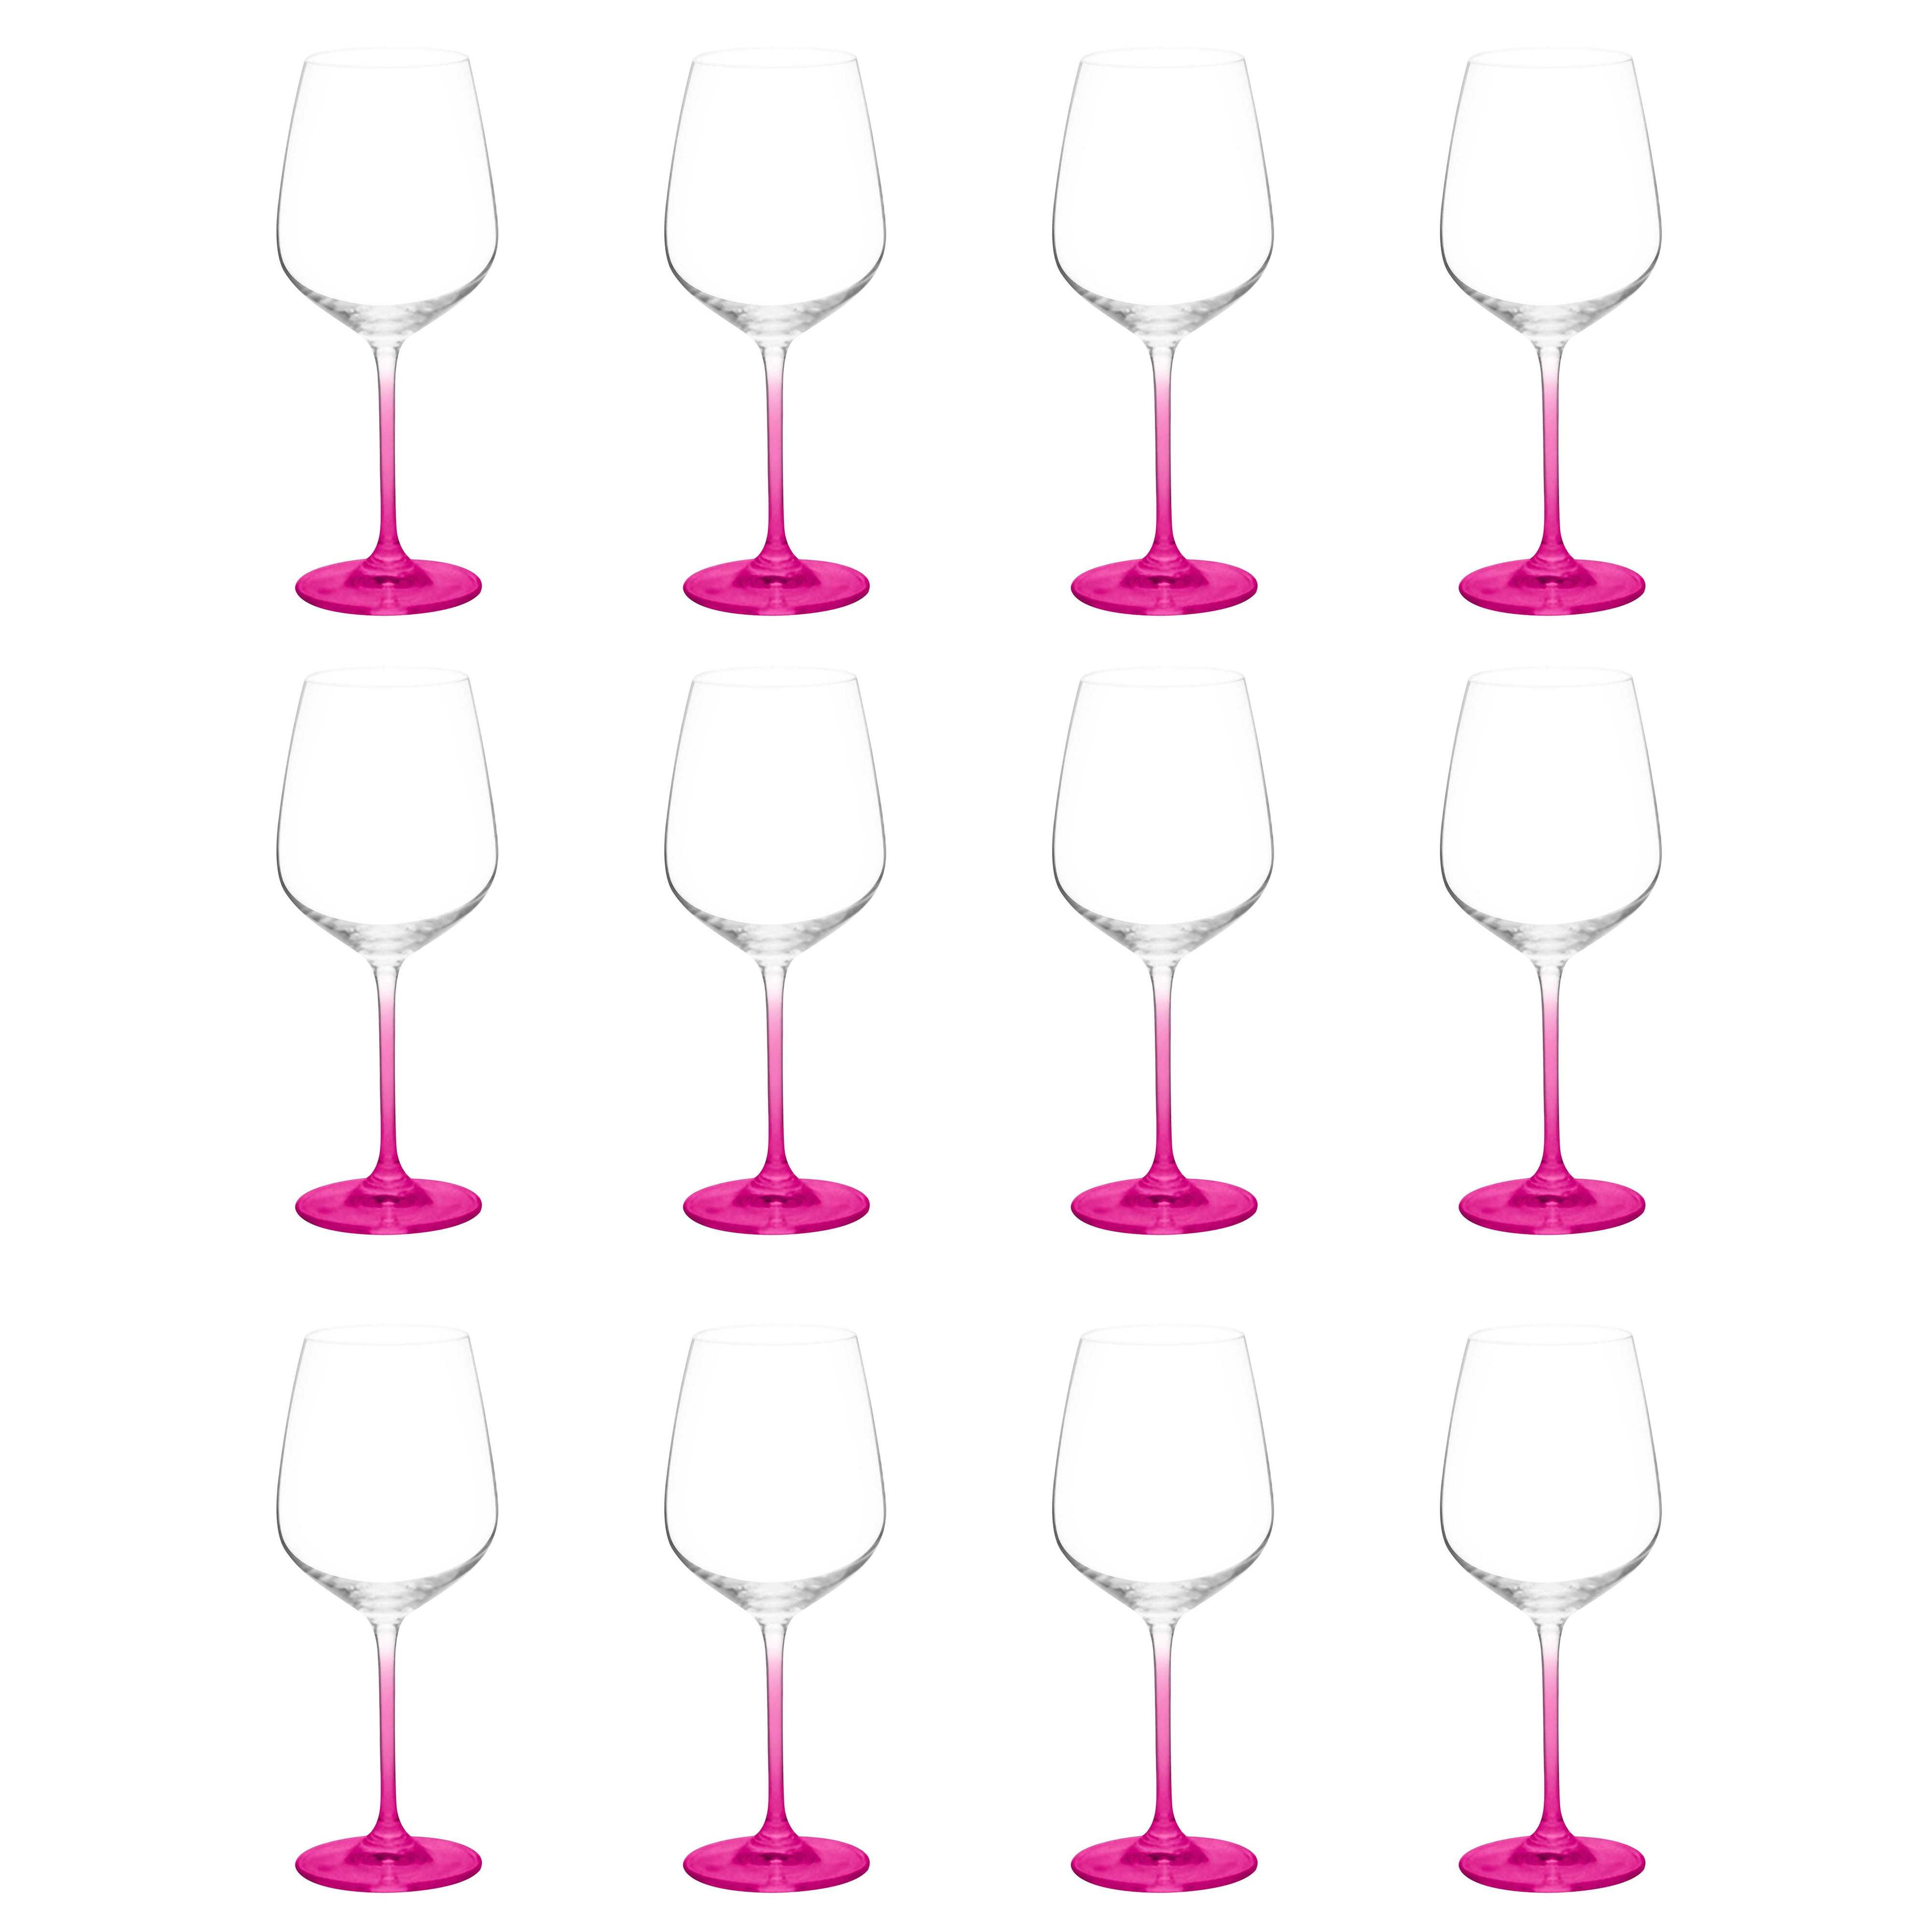 Colored Wine Glasses, Pink, Set of 2, Stemware 2 Count (Pack of 1)